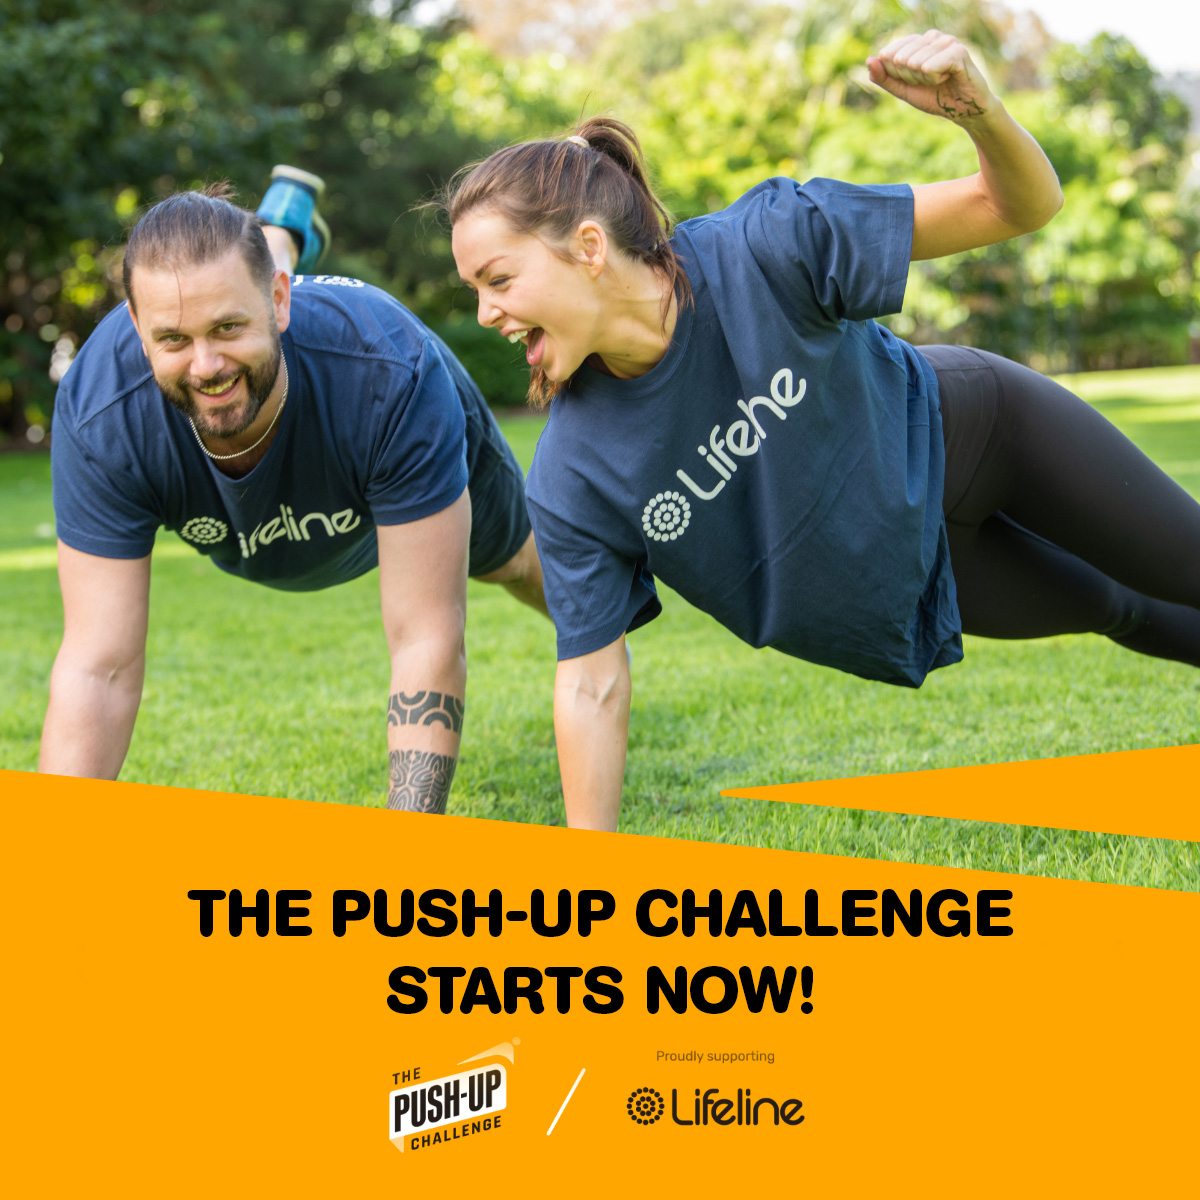 The Push-Up Challenge kicks off today! From June 1 to 25, thousands of Aussies will join the push towards 3,139 push-ups in support of Lifeline! #MentalHealth #MentalHealthAwareness #SuicidePrevention #PushForBetter @PushForBetter